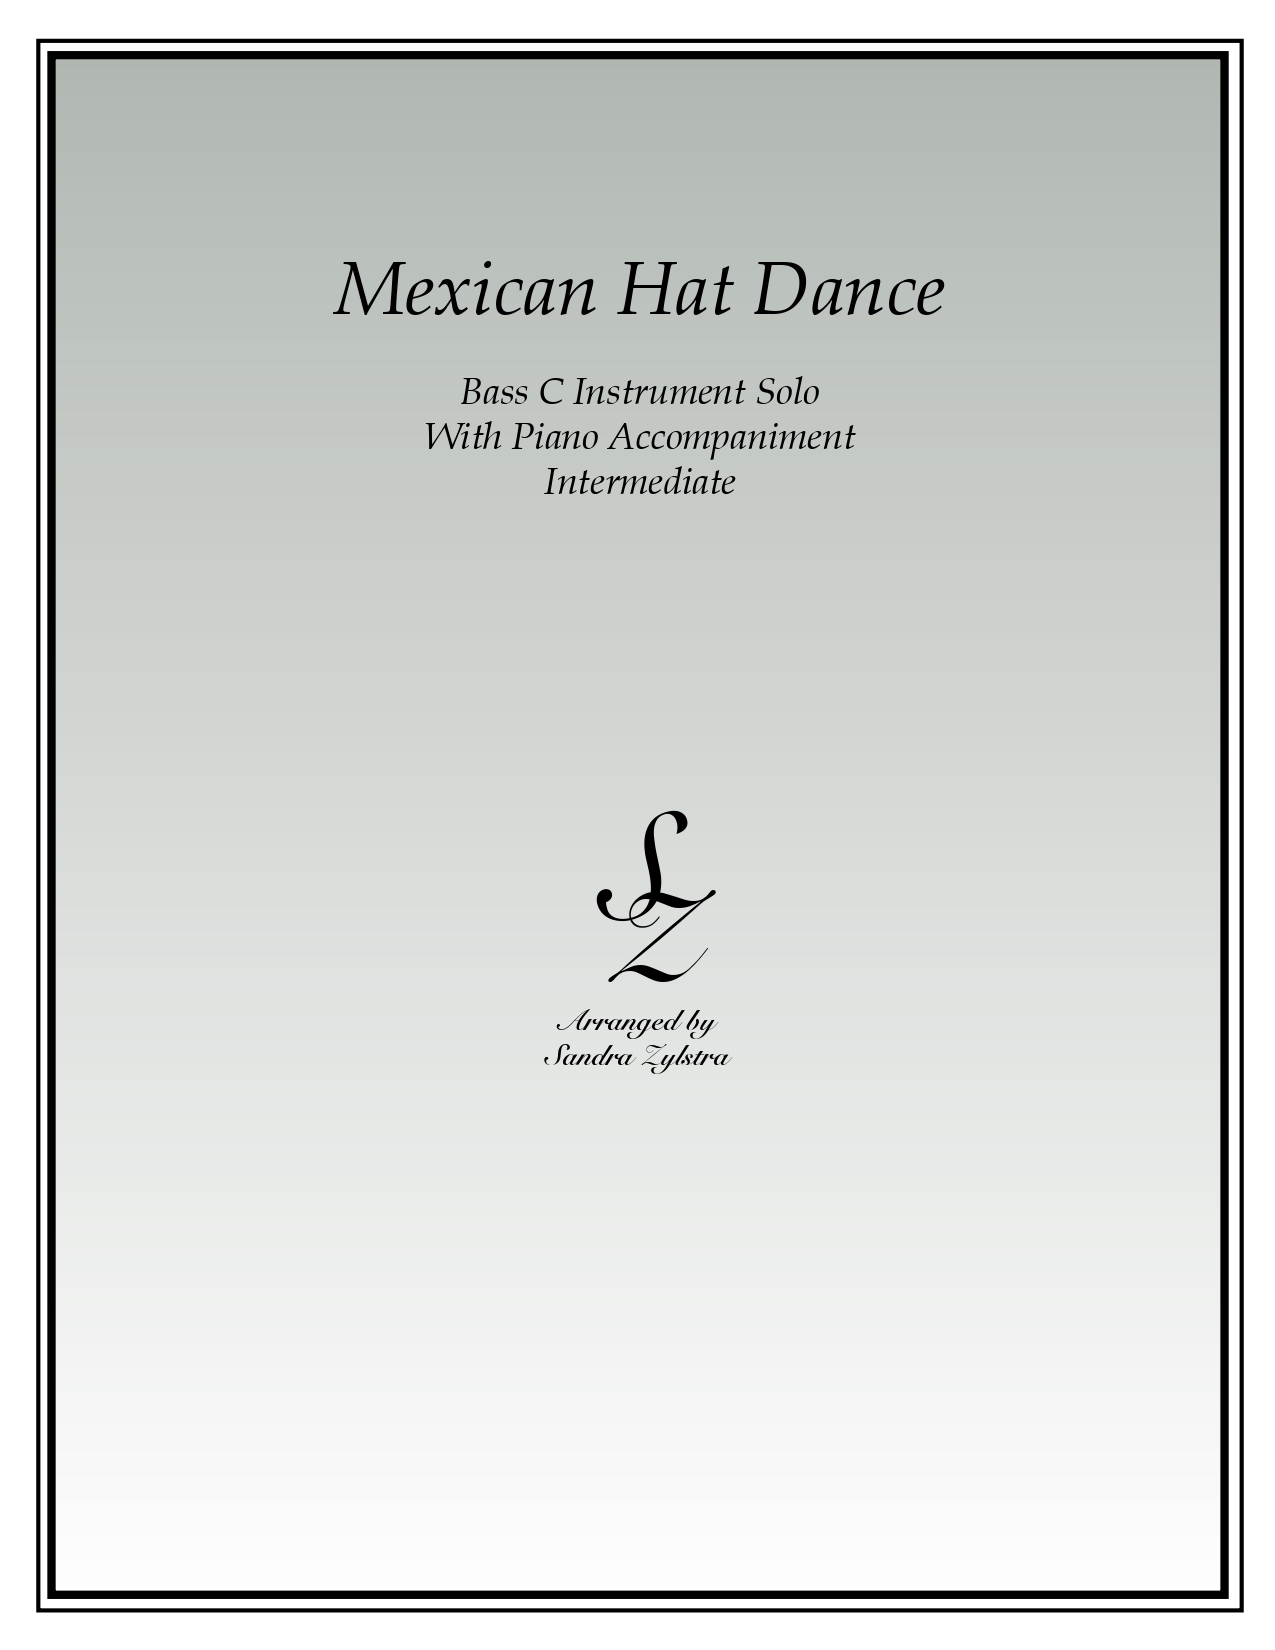 Mexican Hat Dance bass C instrument solo part cover page 00011